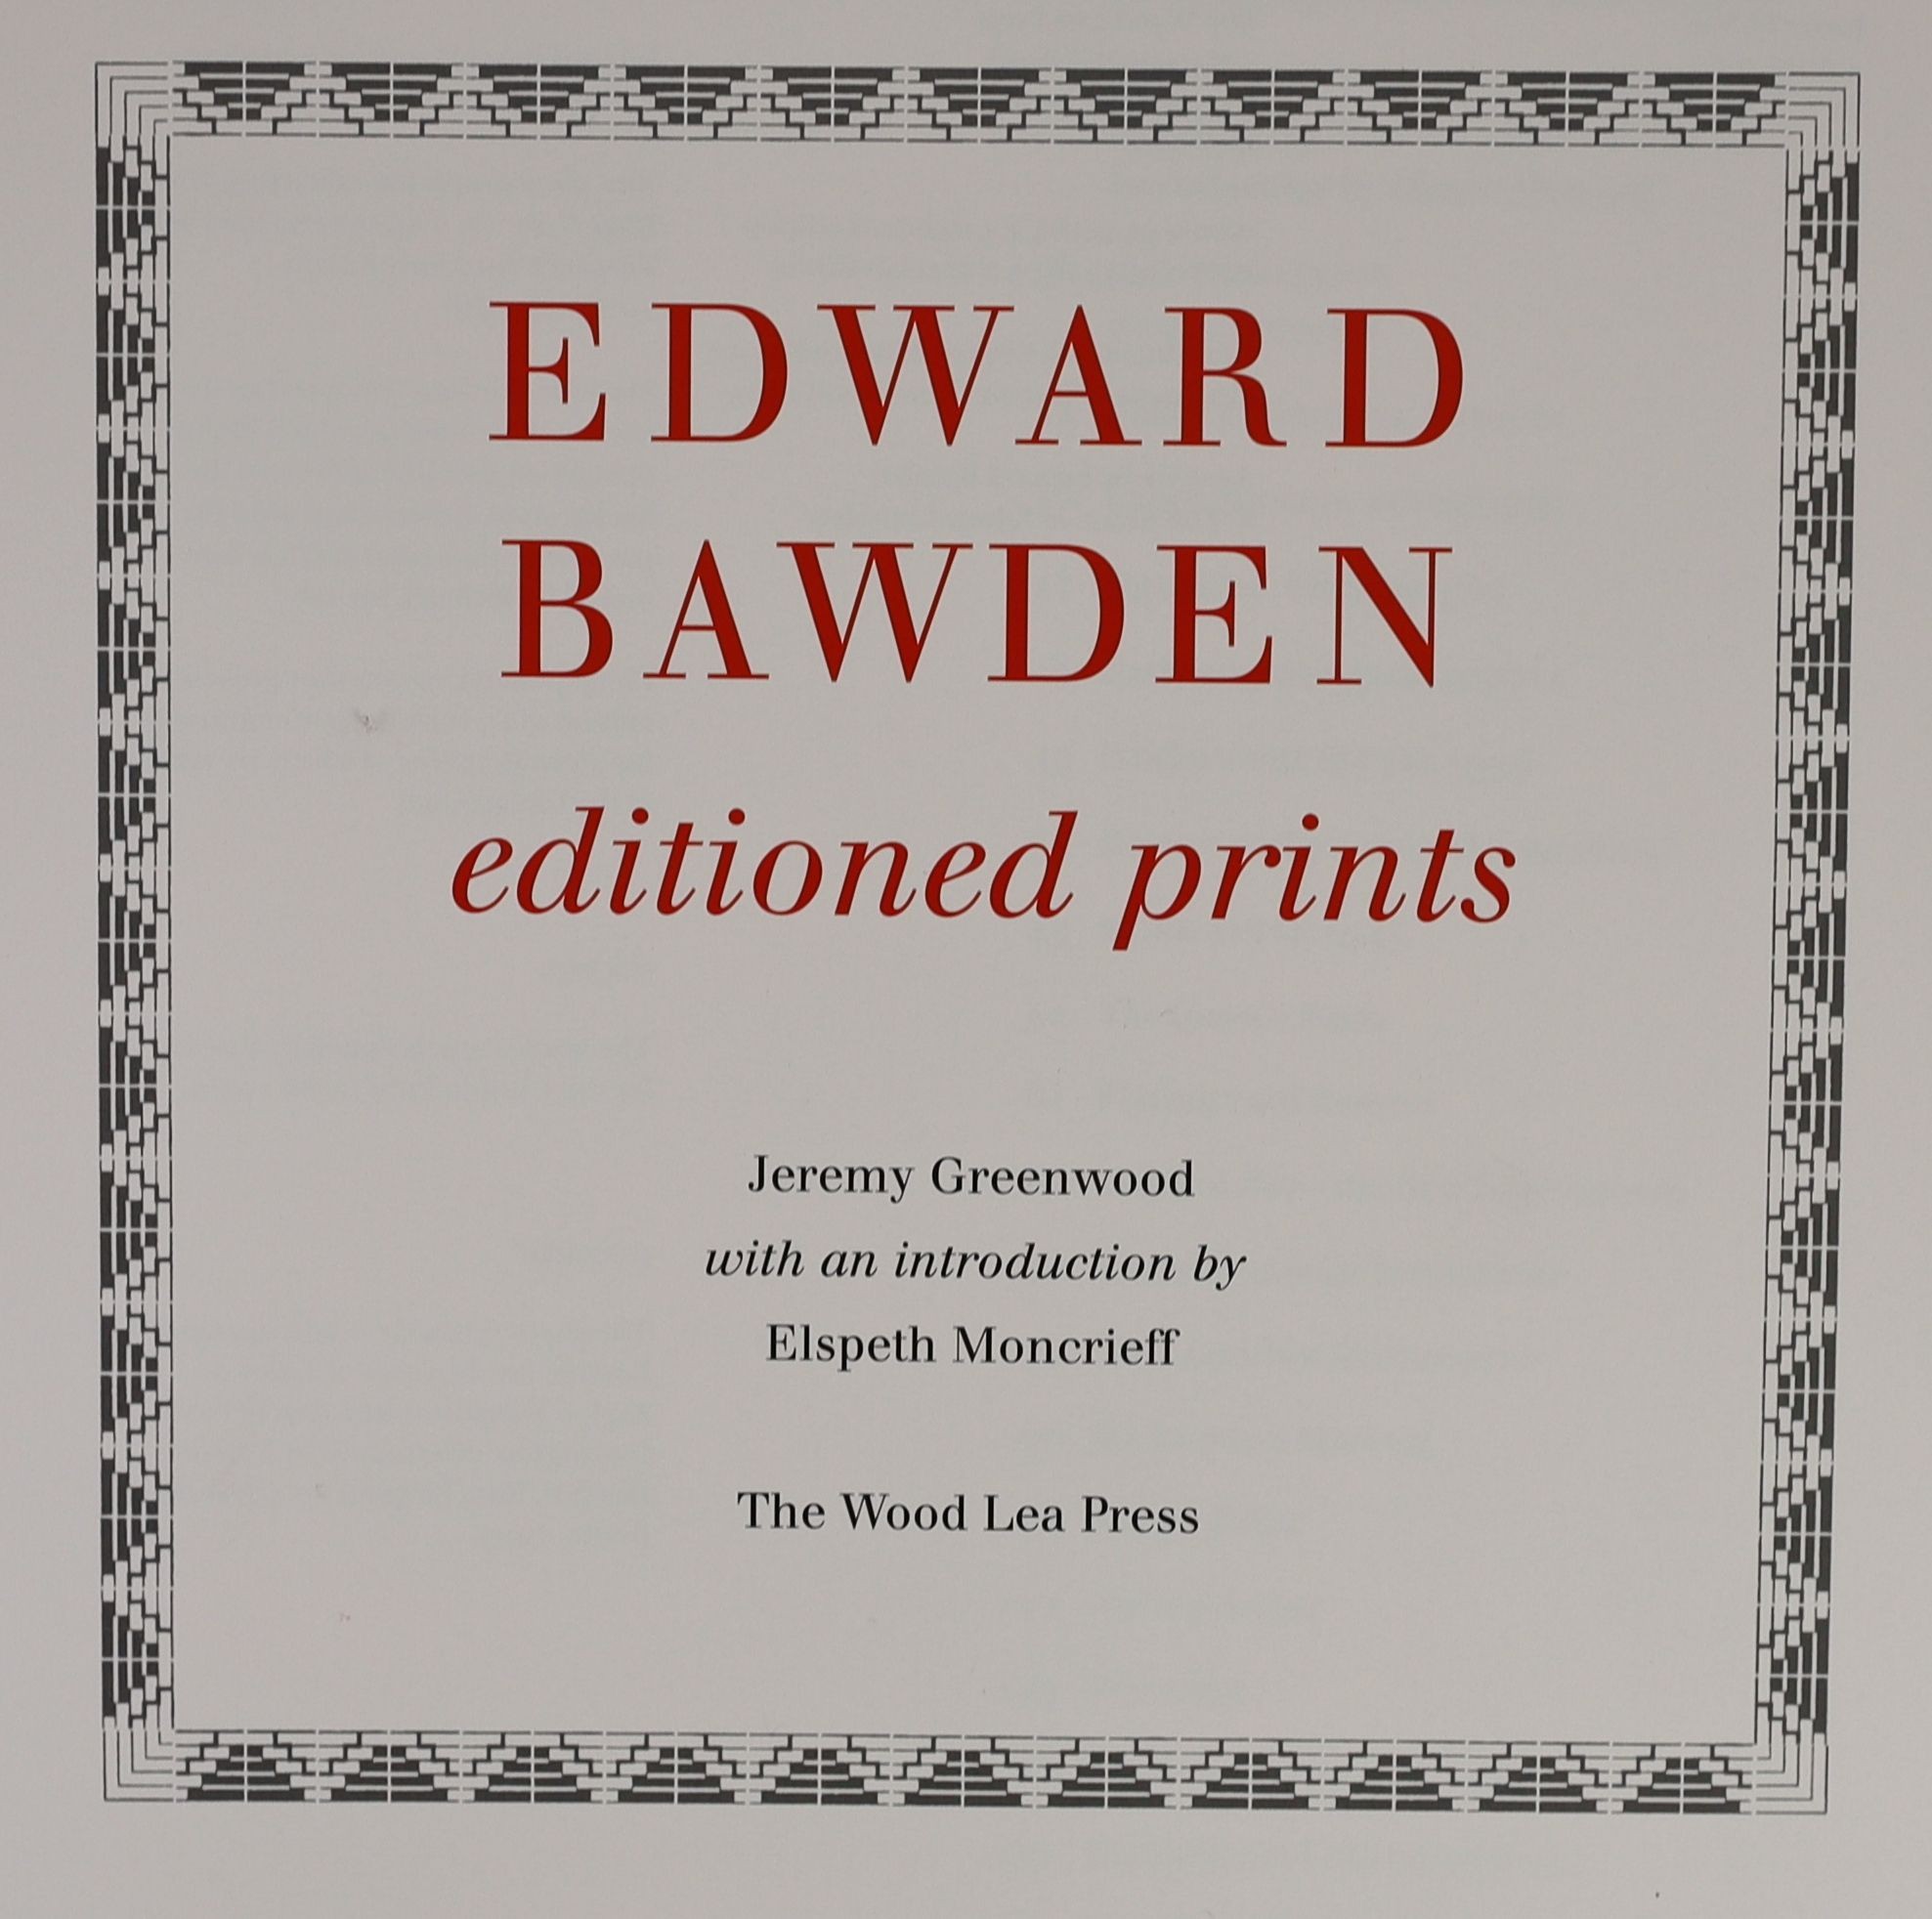 Skipwith, Peyton - Entertaining A’ L Carte - Edward Bawden and Fortnum & Mason, one of 1000, The Mainstone Press, Norwich, 2007 and Greenwood, Jeremy - Edward Bawden editioned prints, one of 450, The Wood Lea Press, Wood